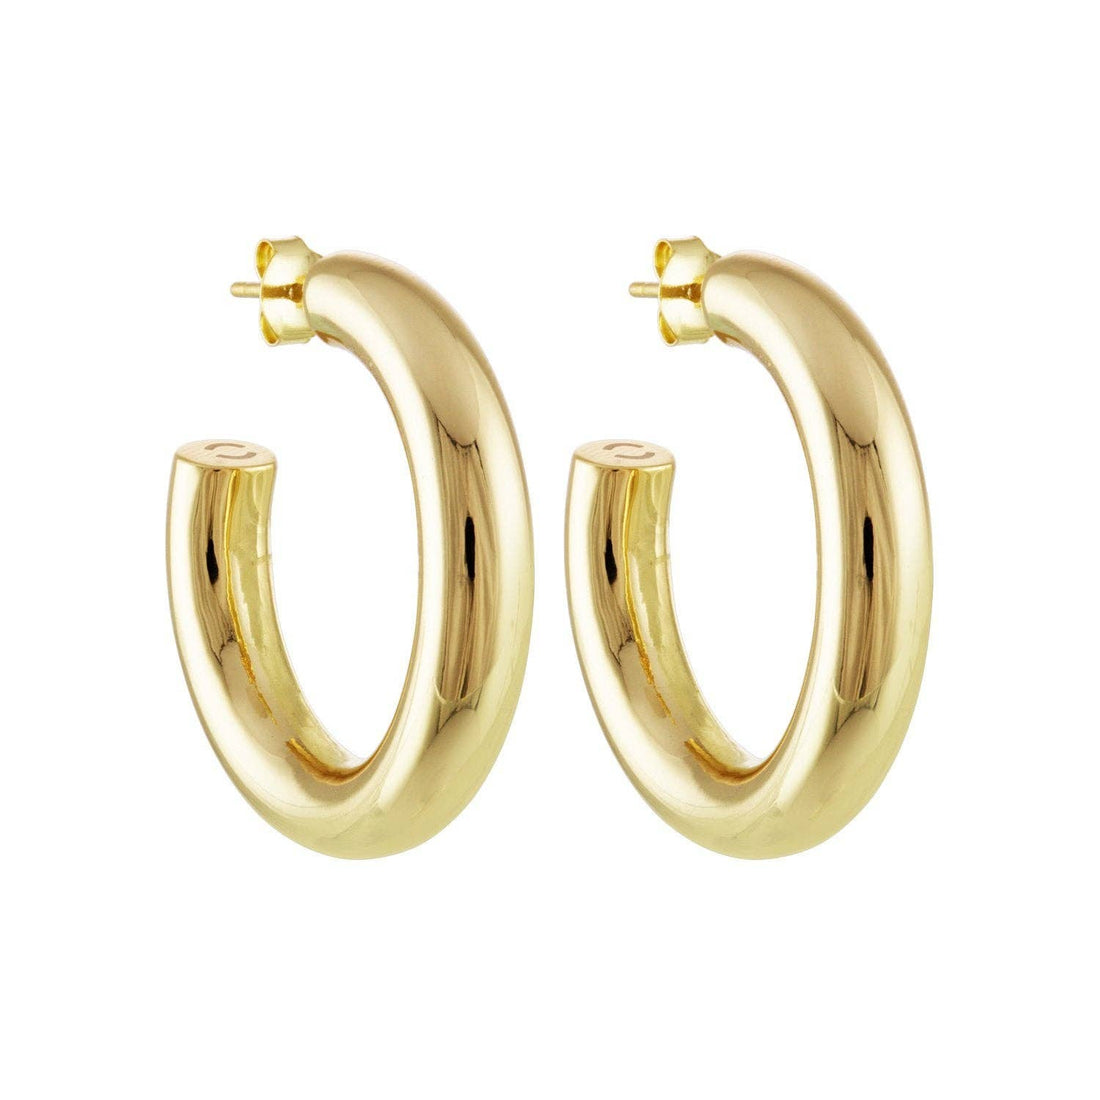 1" Perfect Hoops in Gold: Gold Filled